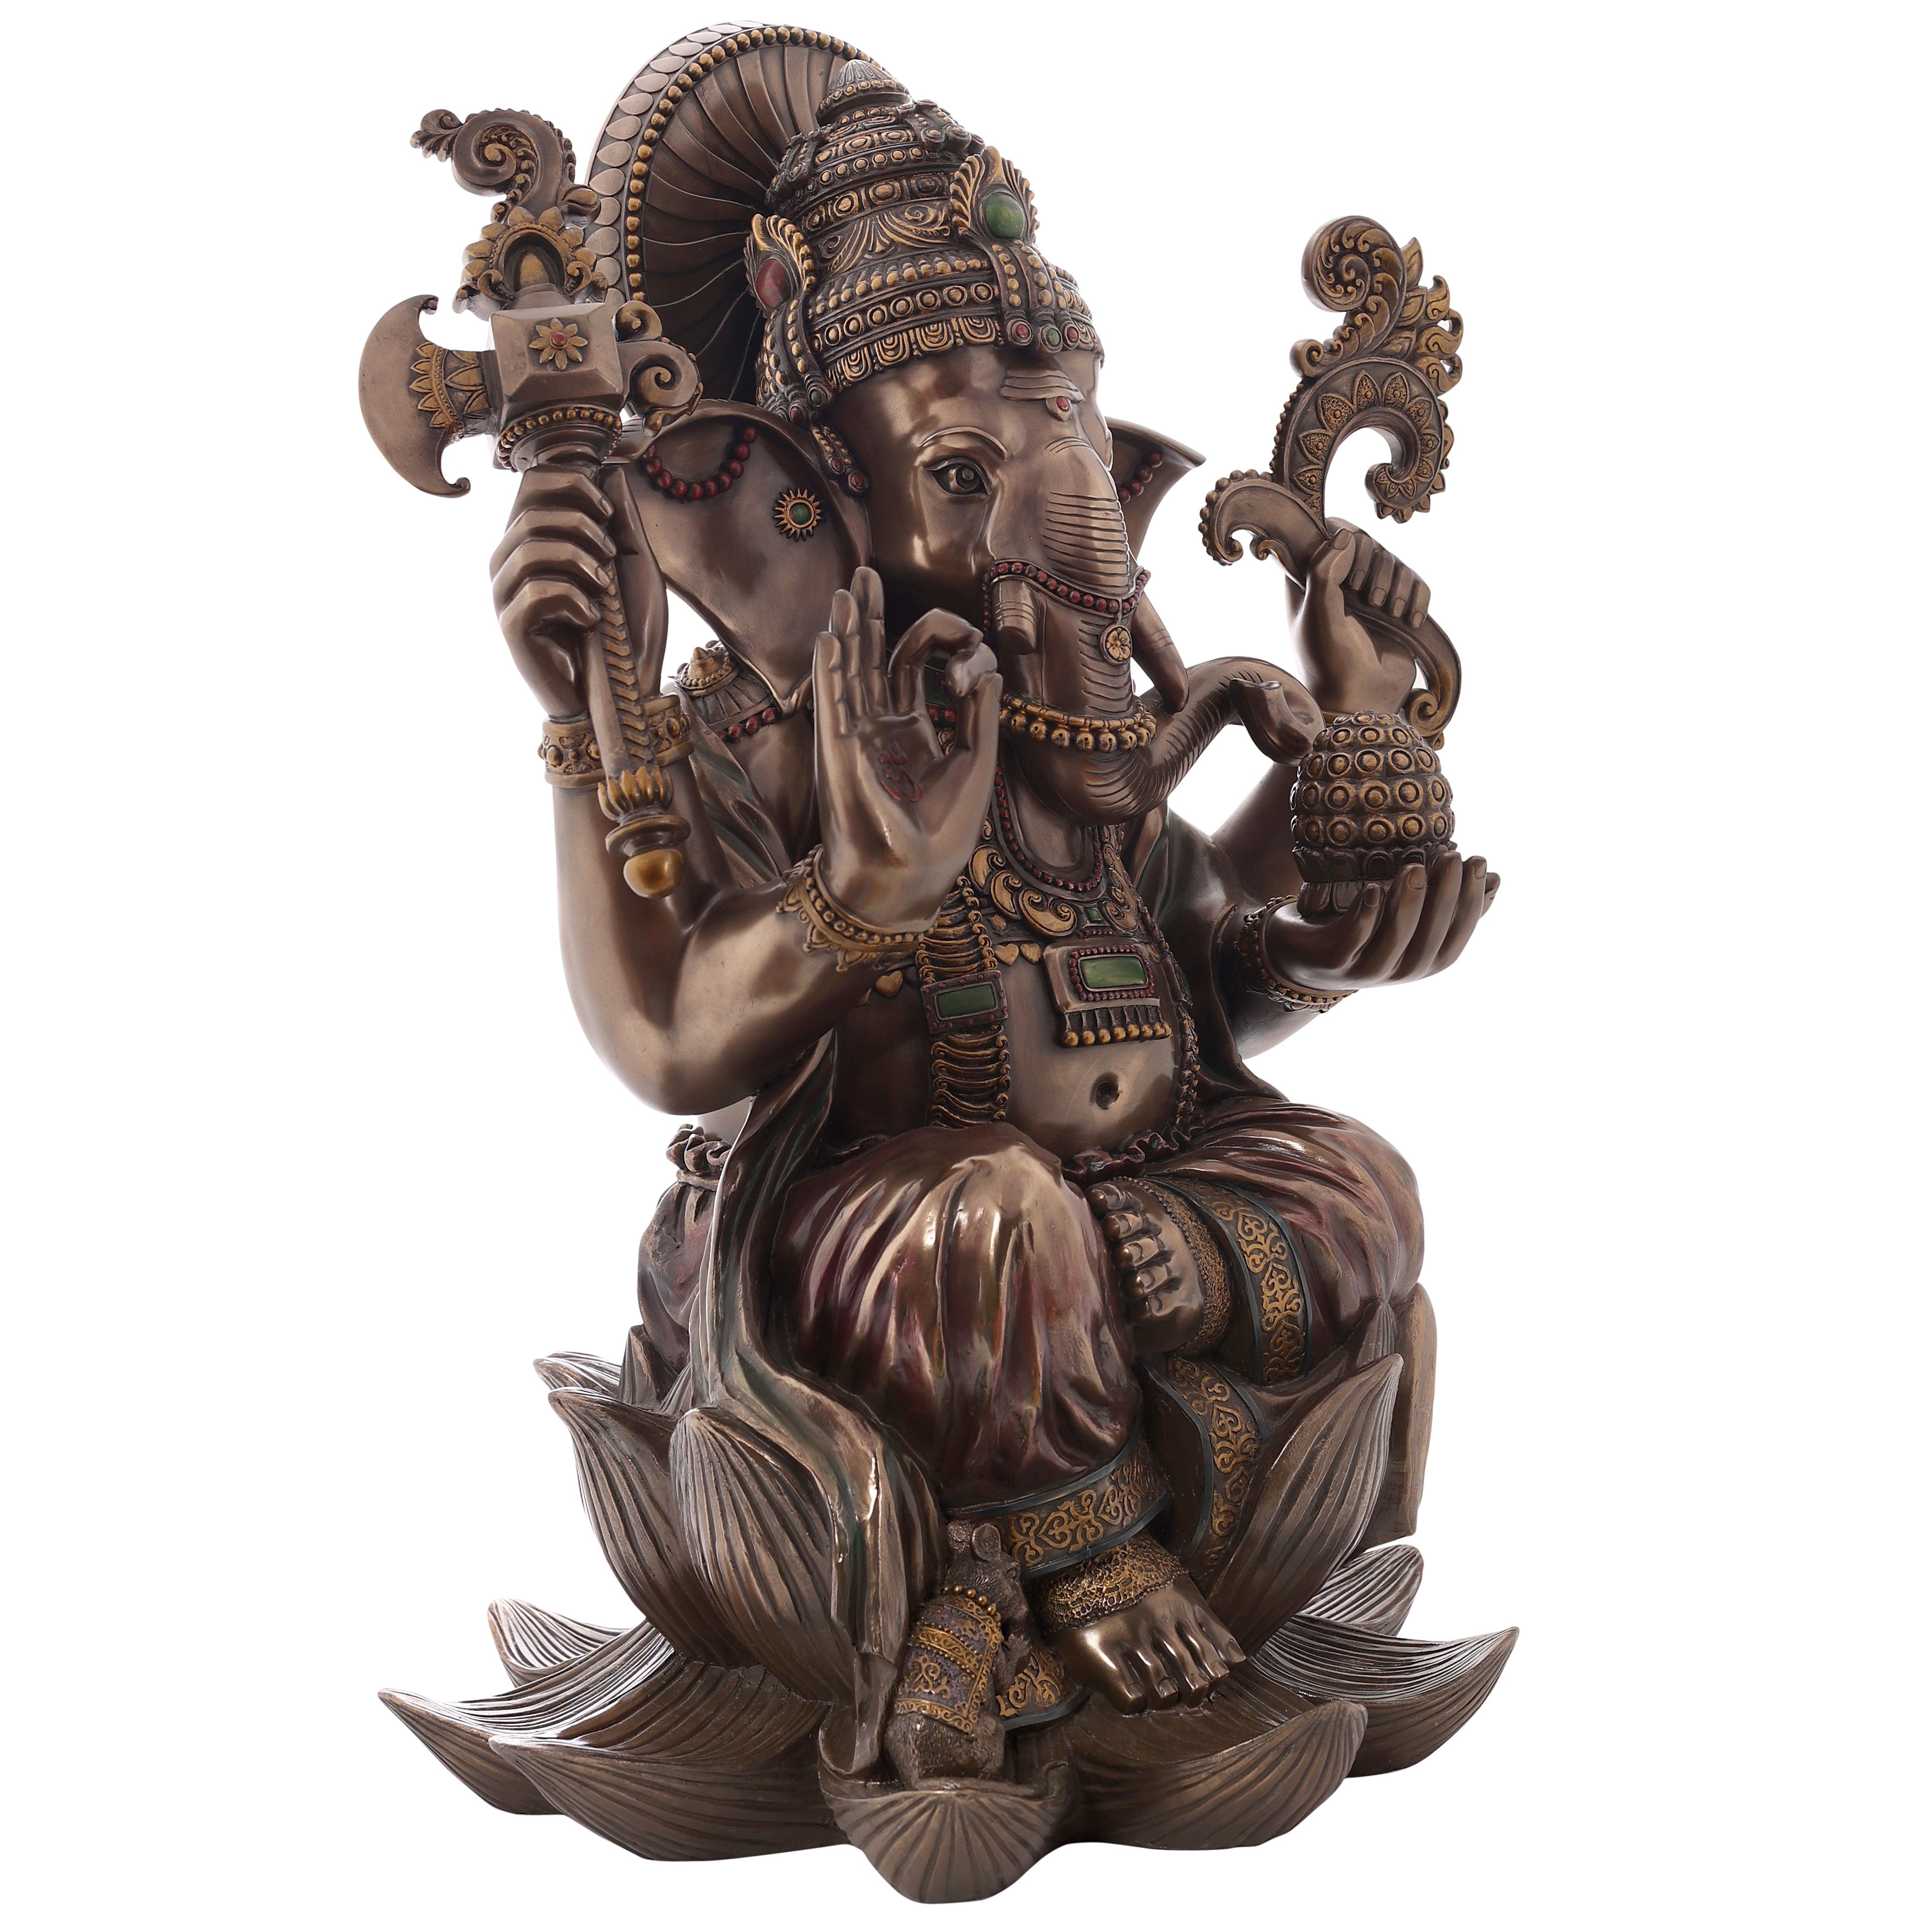 Lord Ganesha sitting on lotus Idol made of Bronze Composite - 18 x 15 x 24 Inch, 11.1 Kg